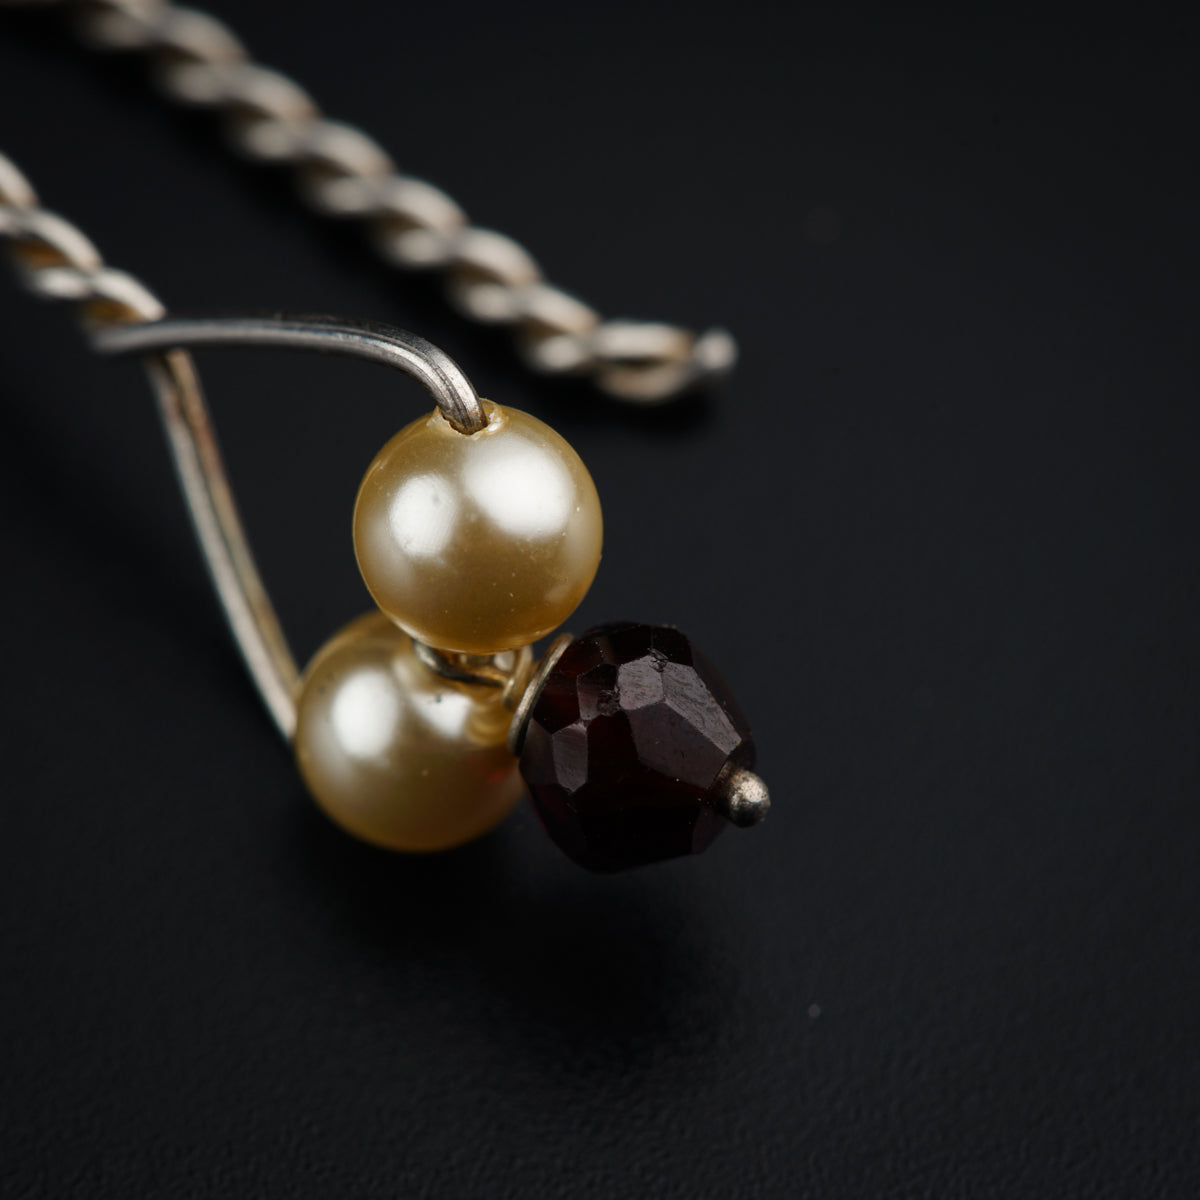 a pair of pearls and a chain on a black surface